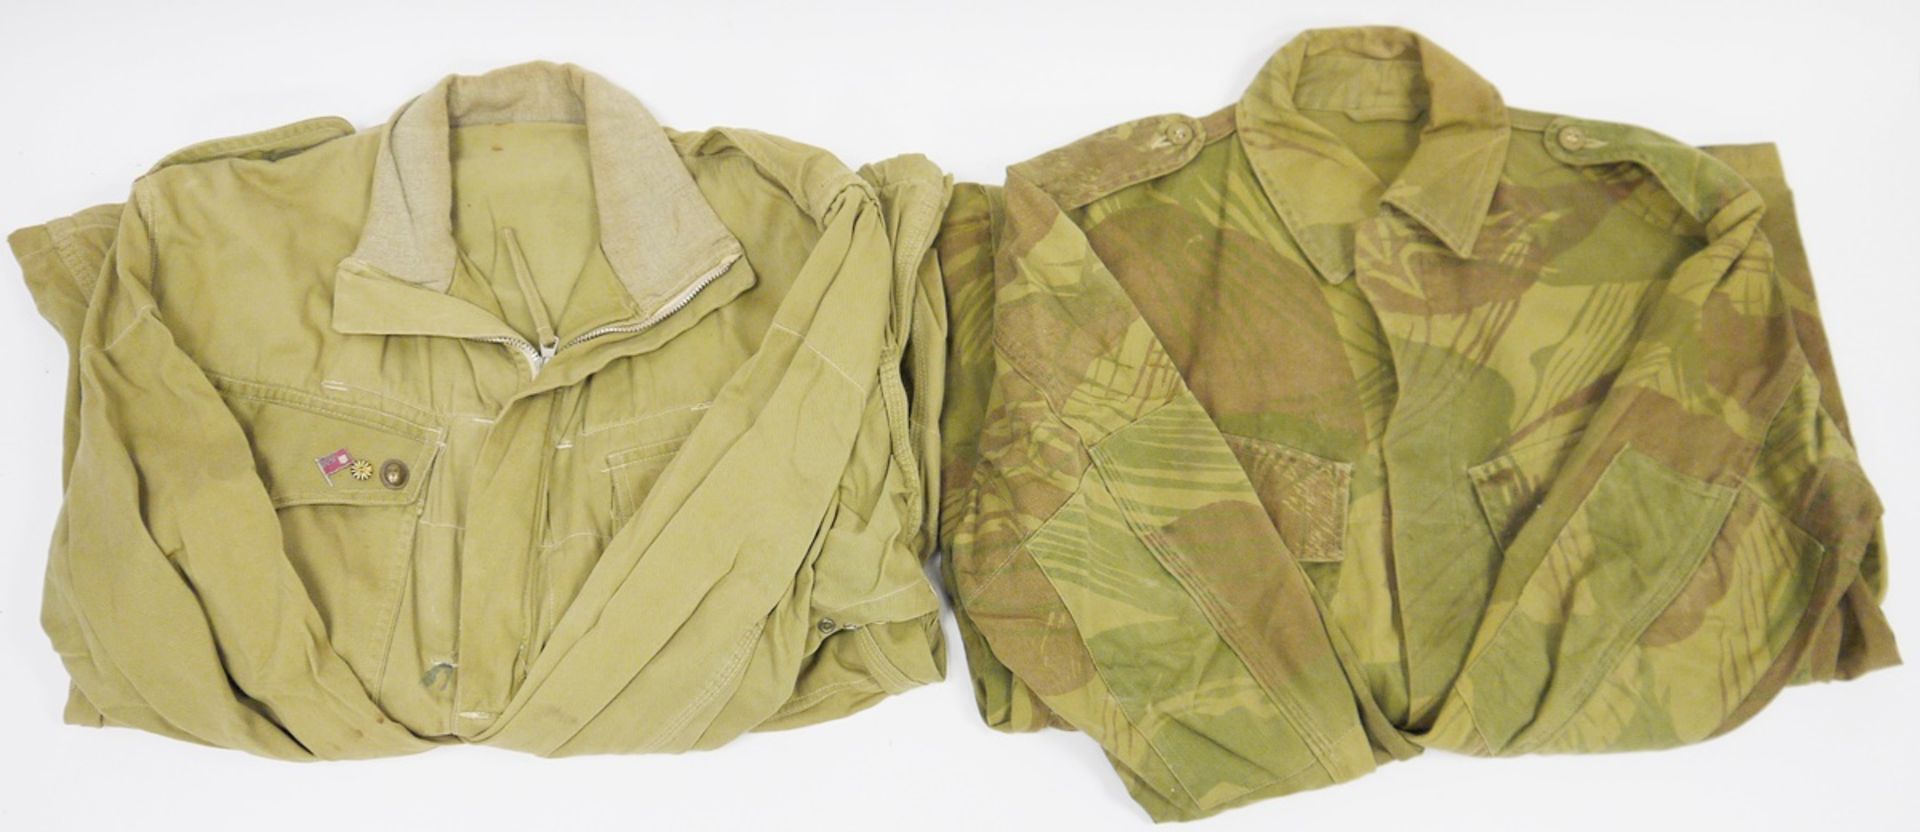 1950's Rhodesian combat jacket and a 1970's camouflage jacket (2)  Condition Report Photos uploaded